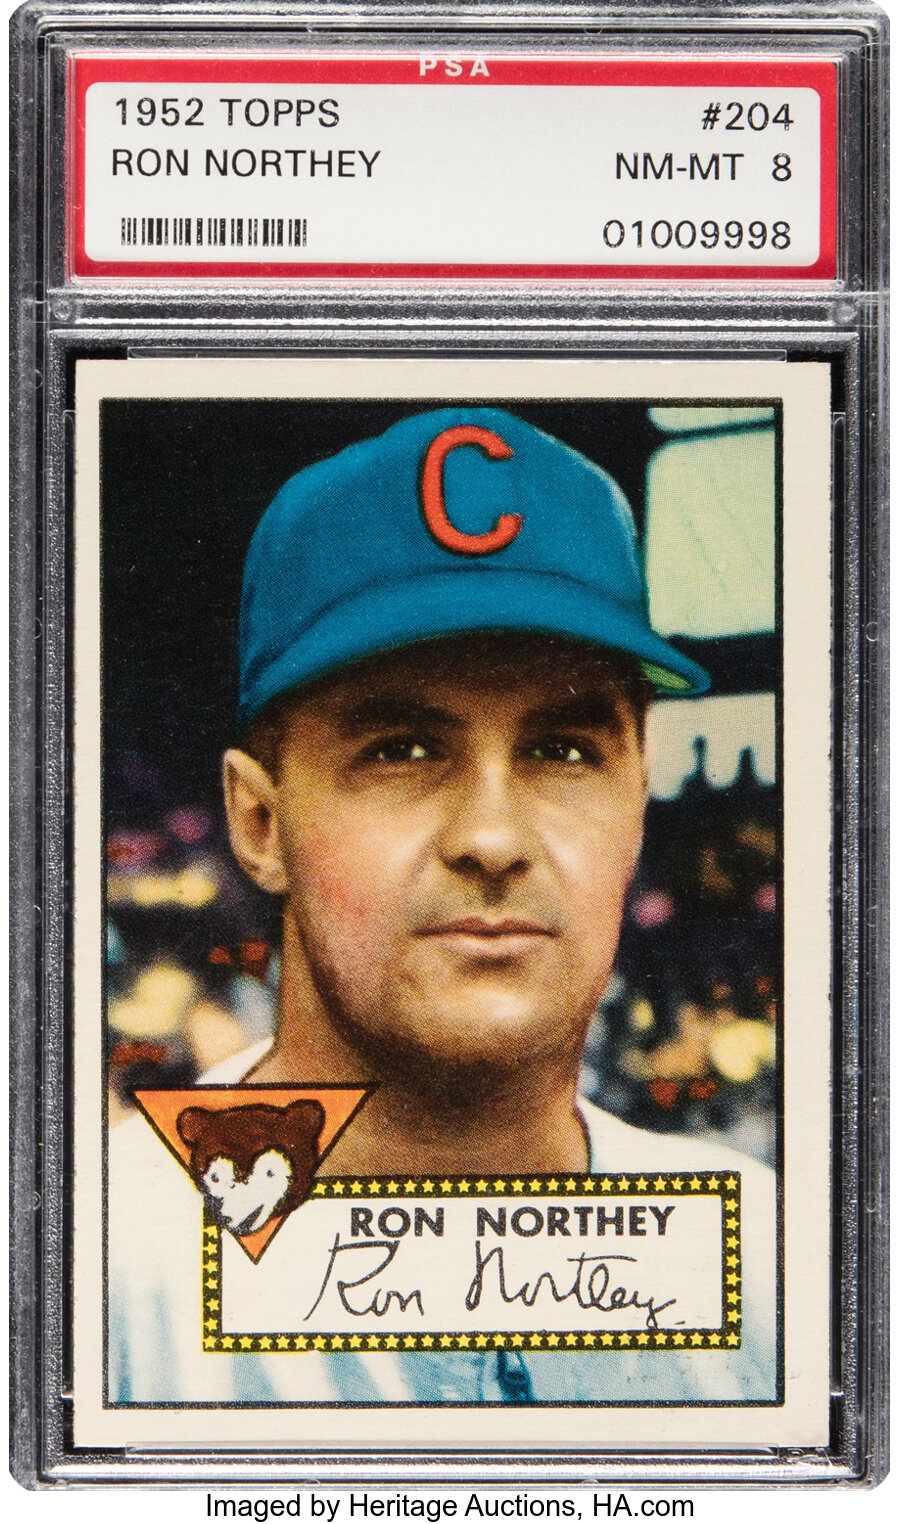 1952 Topps Ron Northey #204 PSA NM-MT 8